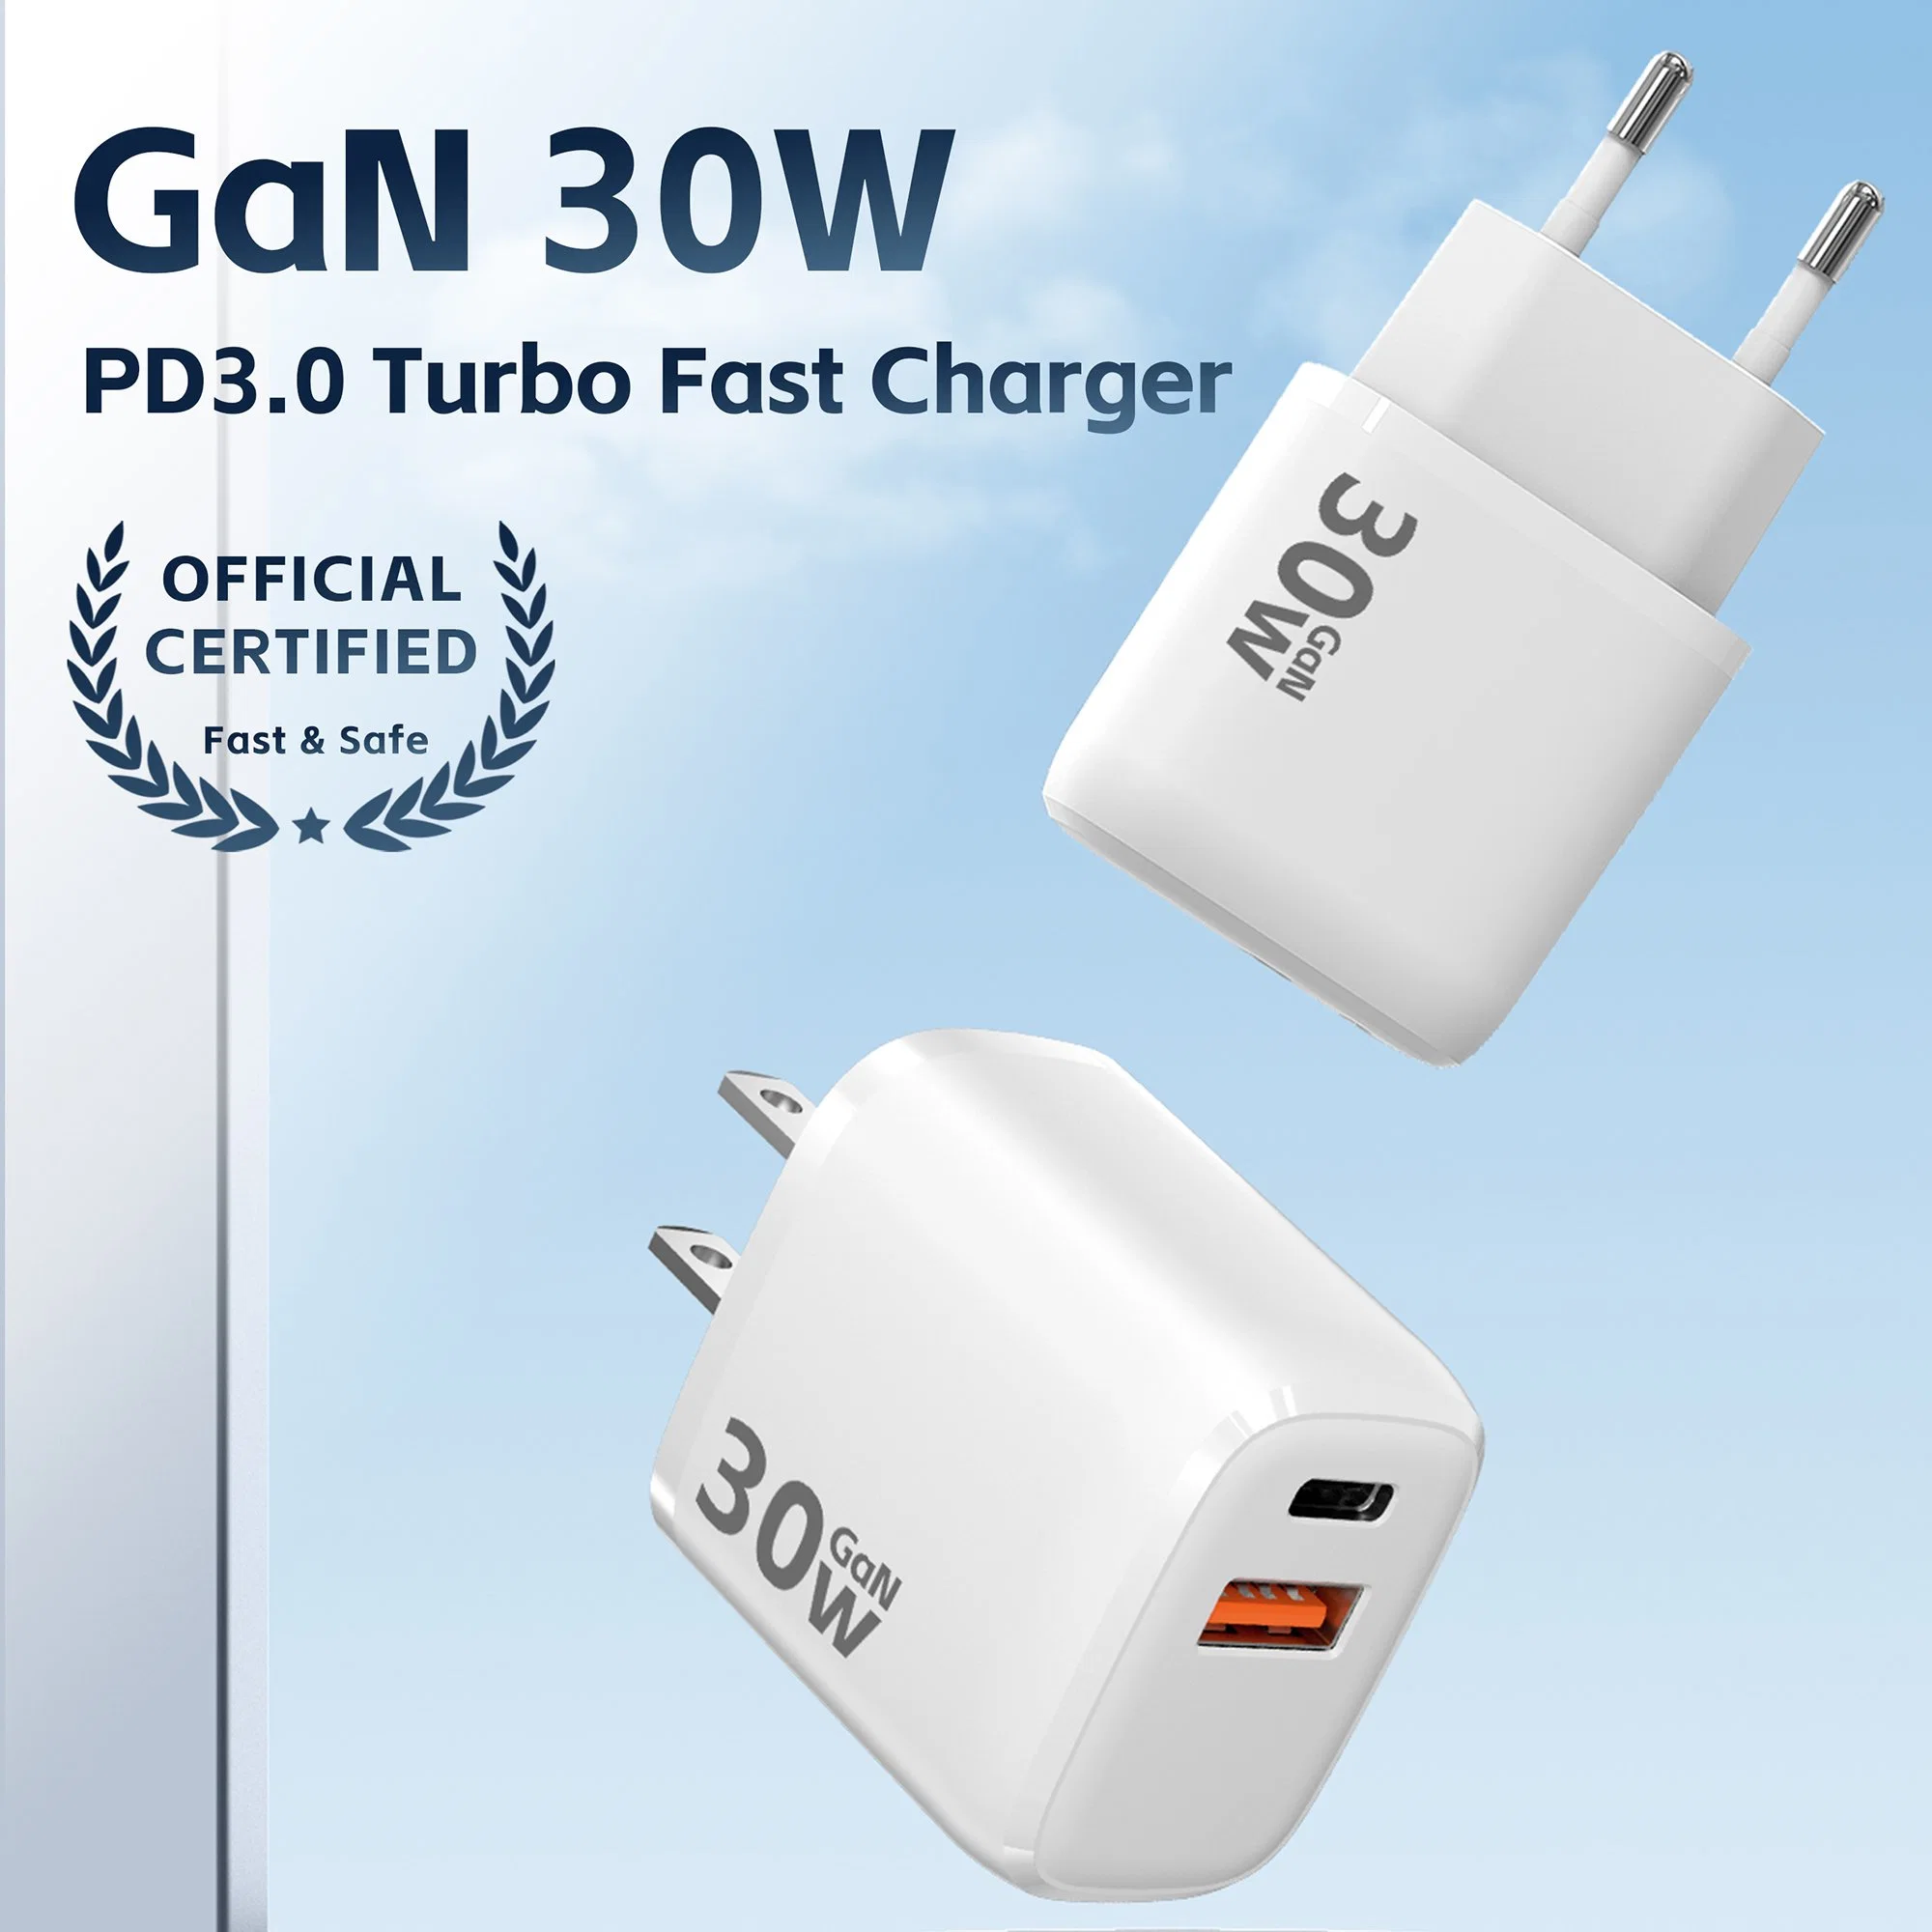 Phone Accessories PC Fireproofing Shell Fast Charger GaN 30W Pd Wall Charger & Adapter for Samsung Huawei Oppo Vivo iPhone